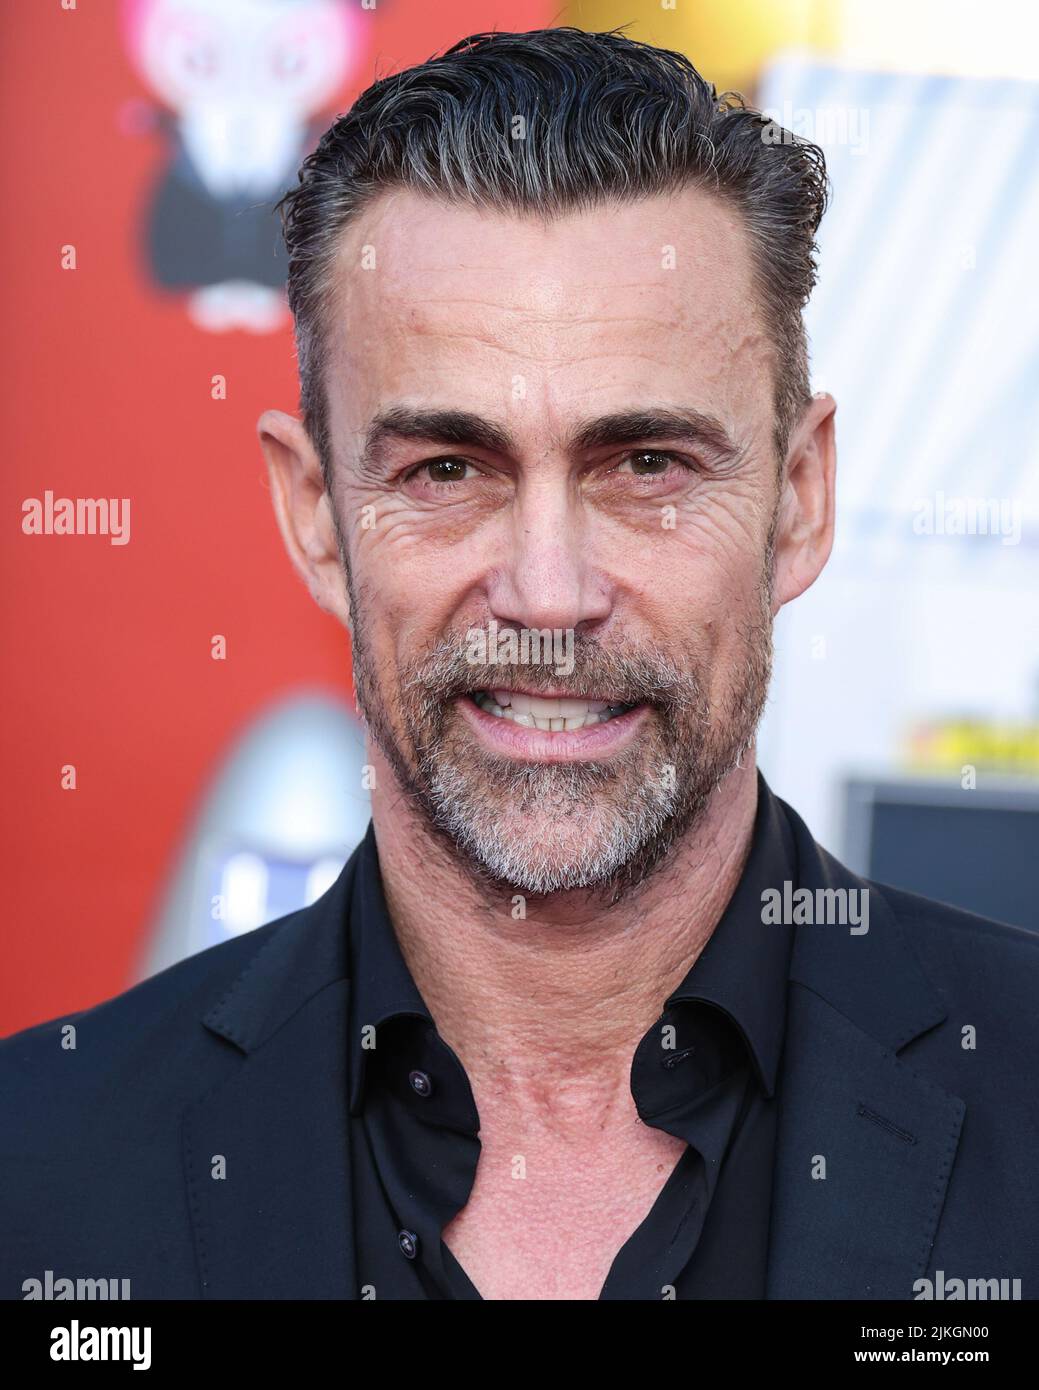 WESTWOOD, LOS ANGELES, CALIFORNIA, USA - AUGUST 01: Daniel Bernhardt arrives at the Los Angeles Premiere Of Sony Pictures' 'Bullet Train' held at the Regency Village Theatre on August 1, 2022 in Westwood, Los Angeles, California, United States. (Photo by Xavier Collin/Image Press Agency) Stock Photo